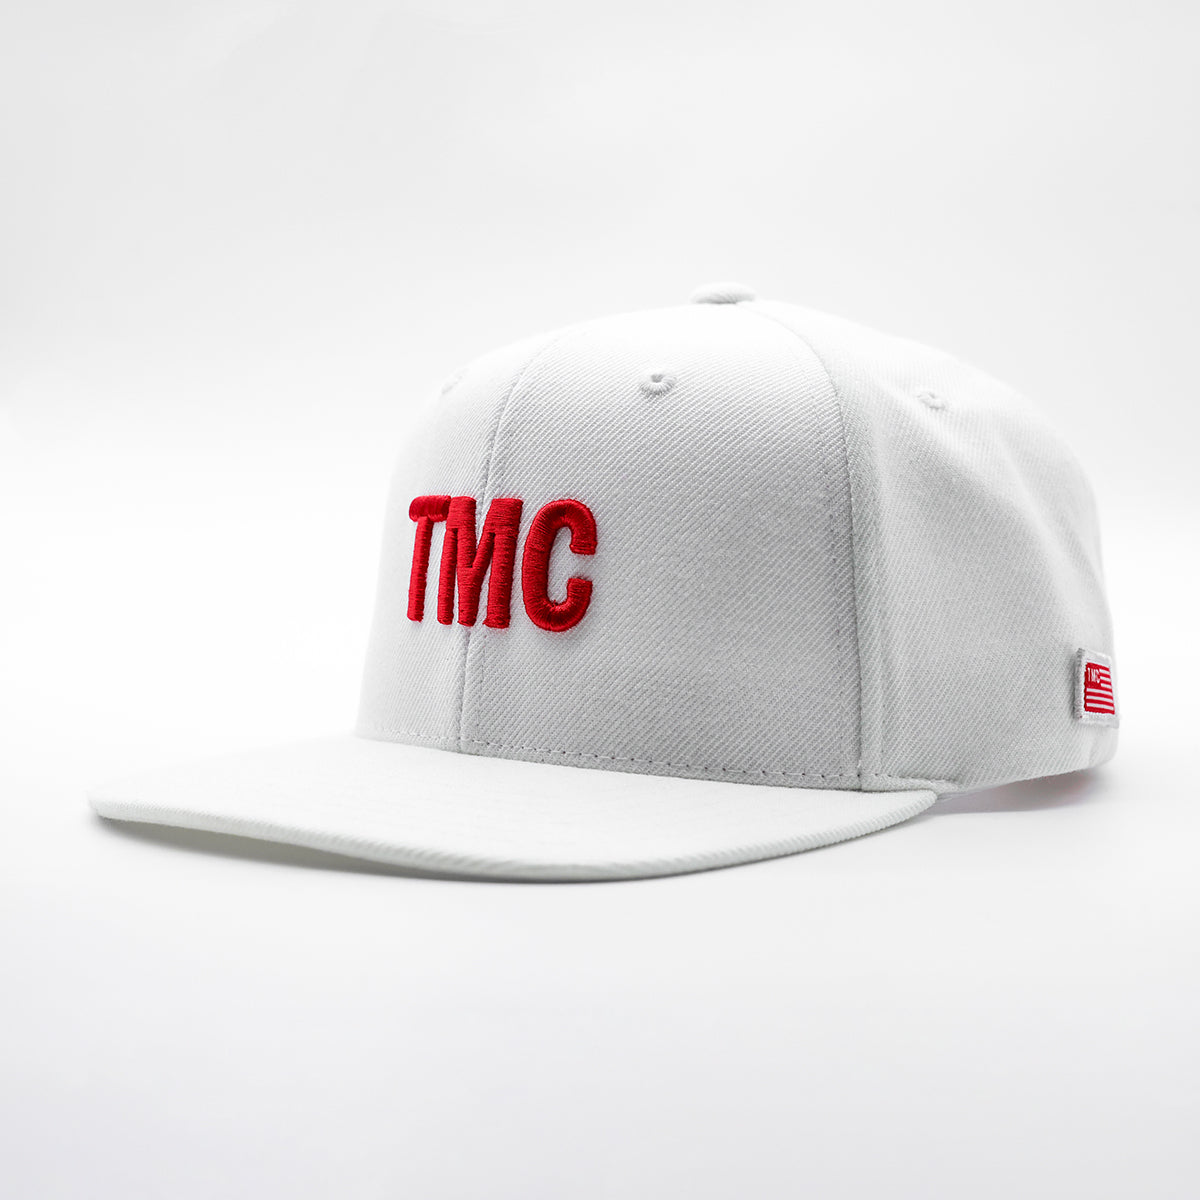 TMC Limited Edition Snapback - White/Red - Angle